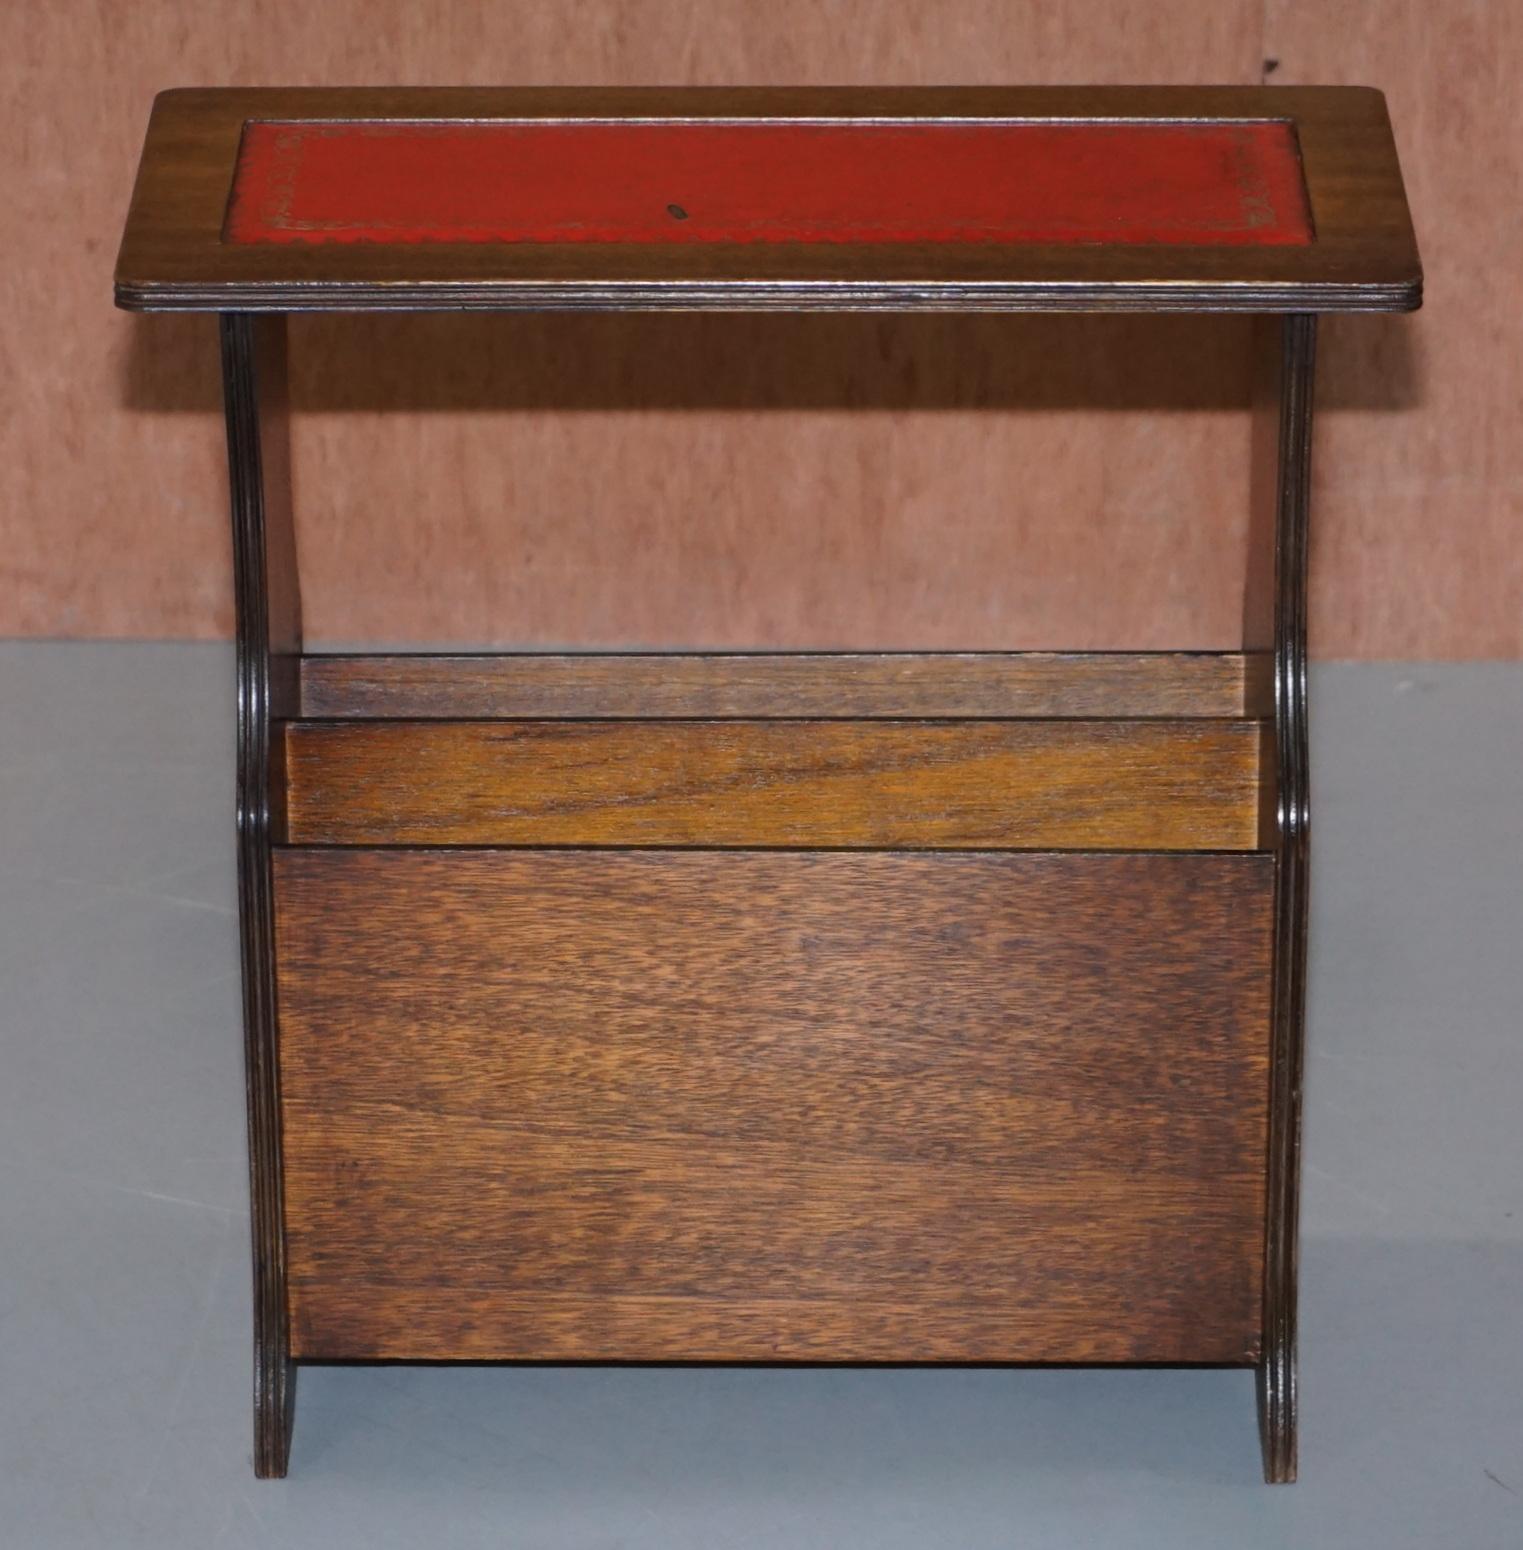 We are delighted to offer for sale this nice vintage light mahogany side table magazine rack with oxblood leather top

A good versatile table, this is circa 40-60 years old, made by Bevan Funnell, the frame is light mahogany, the leather top is